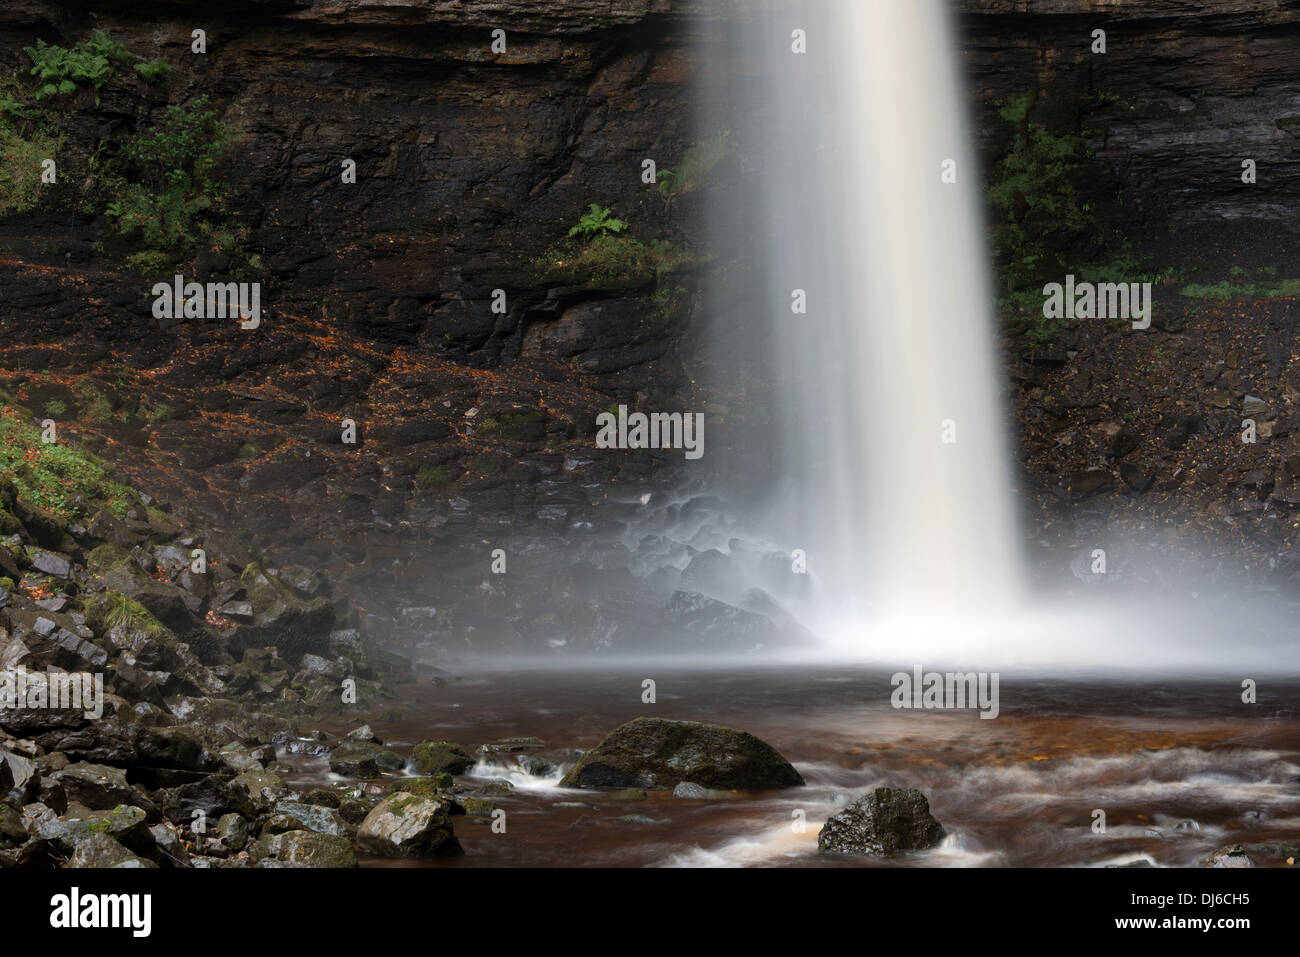 Hardraw force waterfall in Yorkshire Dales. Stock Photo